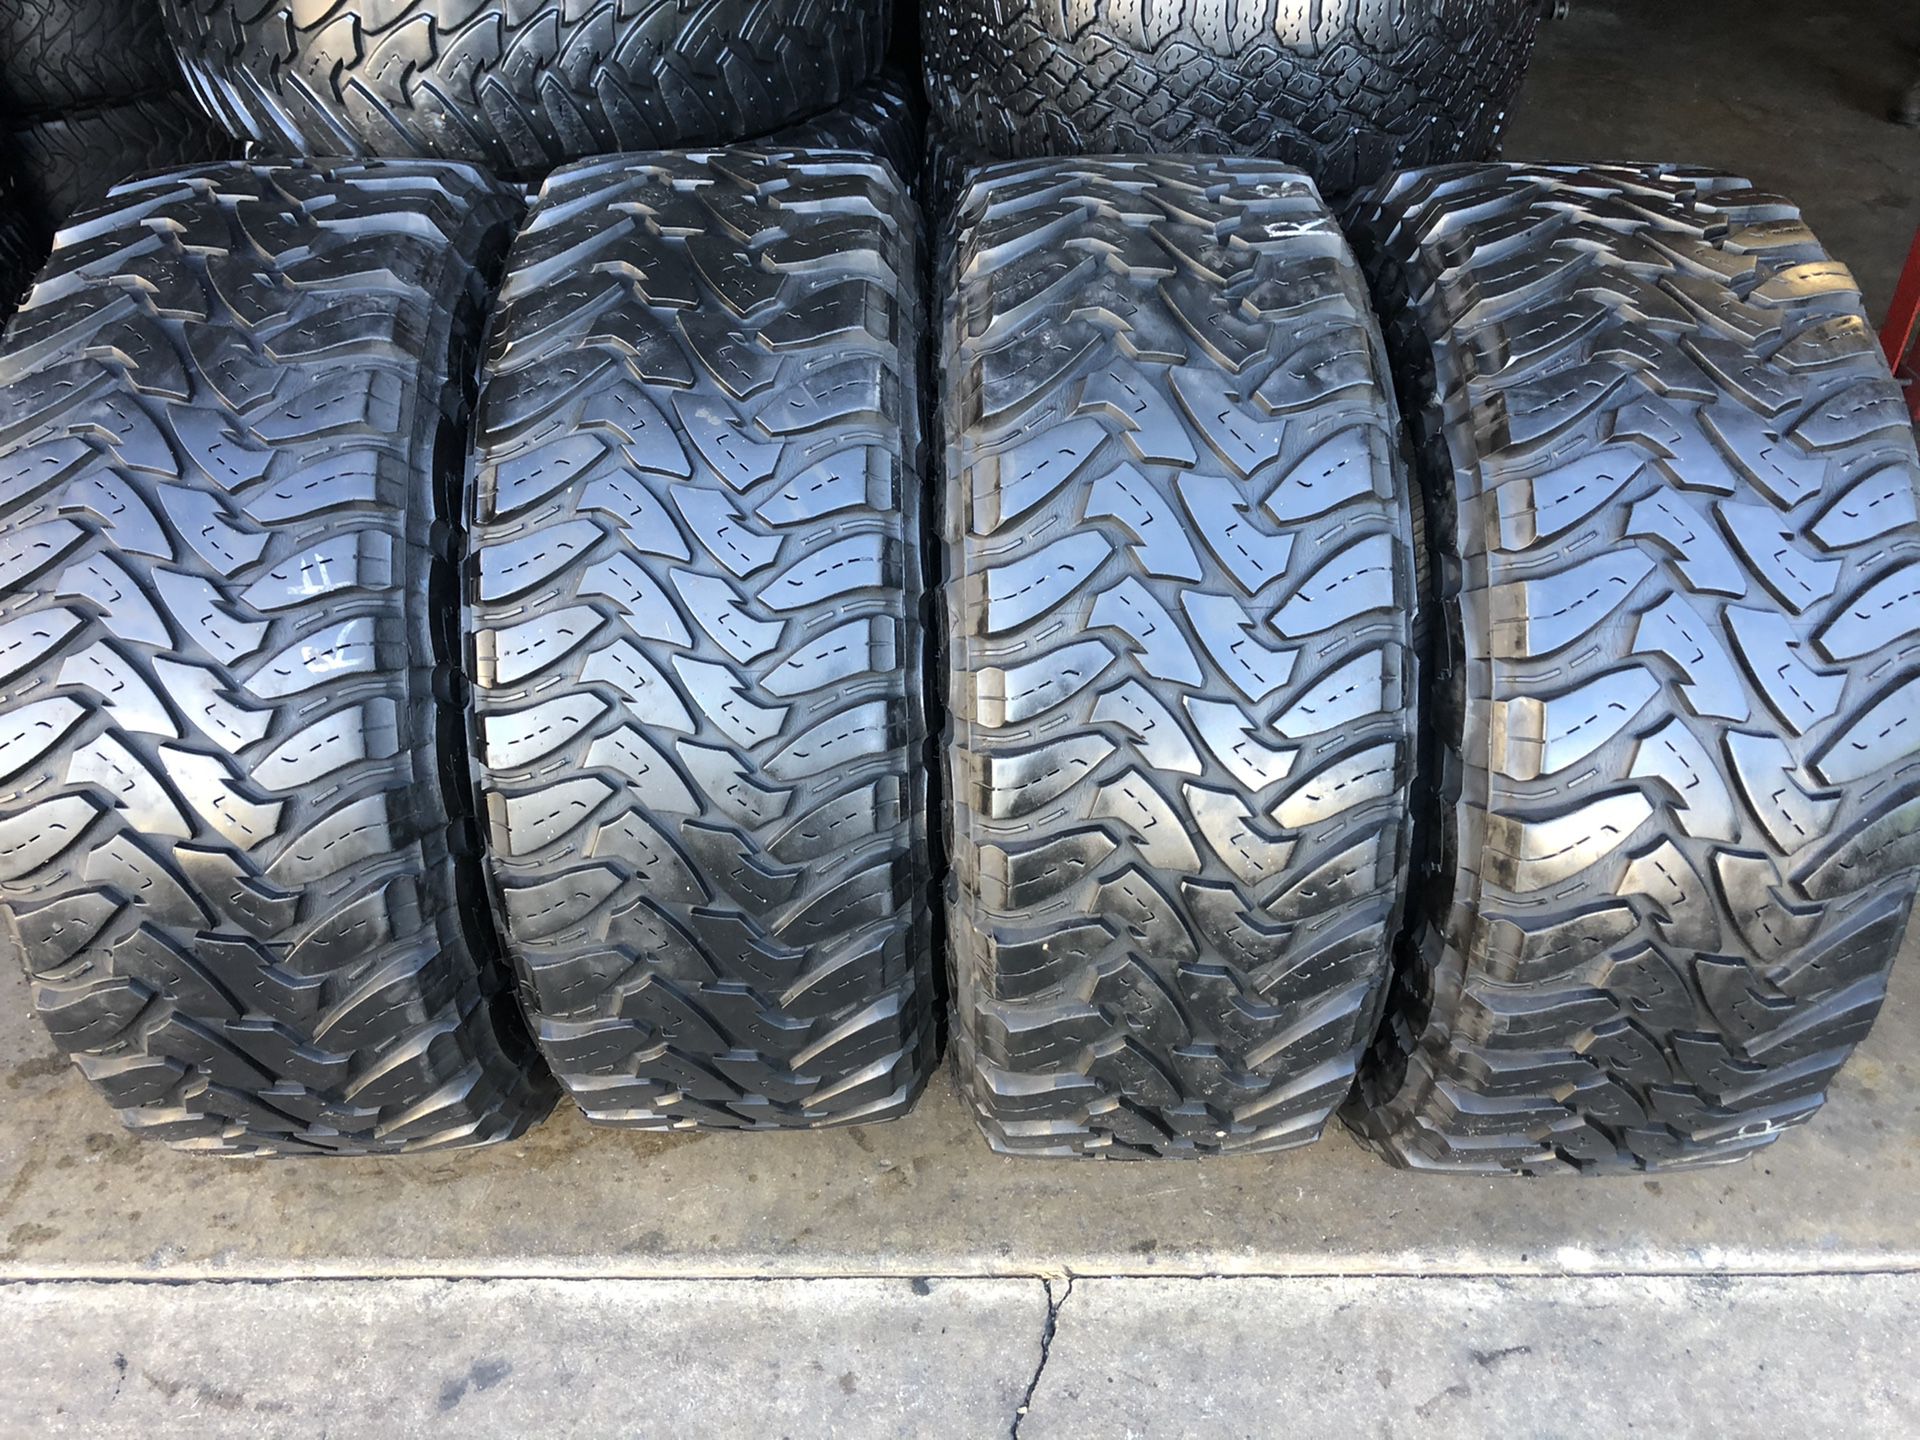 37/13.50R20 Toyo open country (4 for $400)